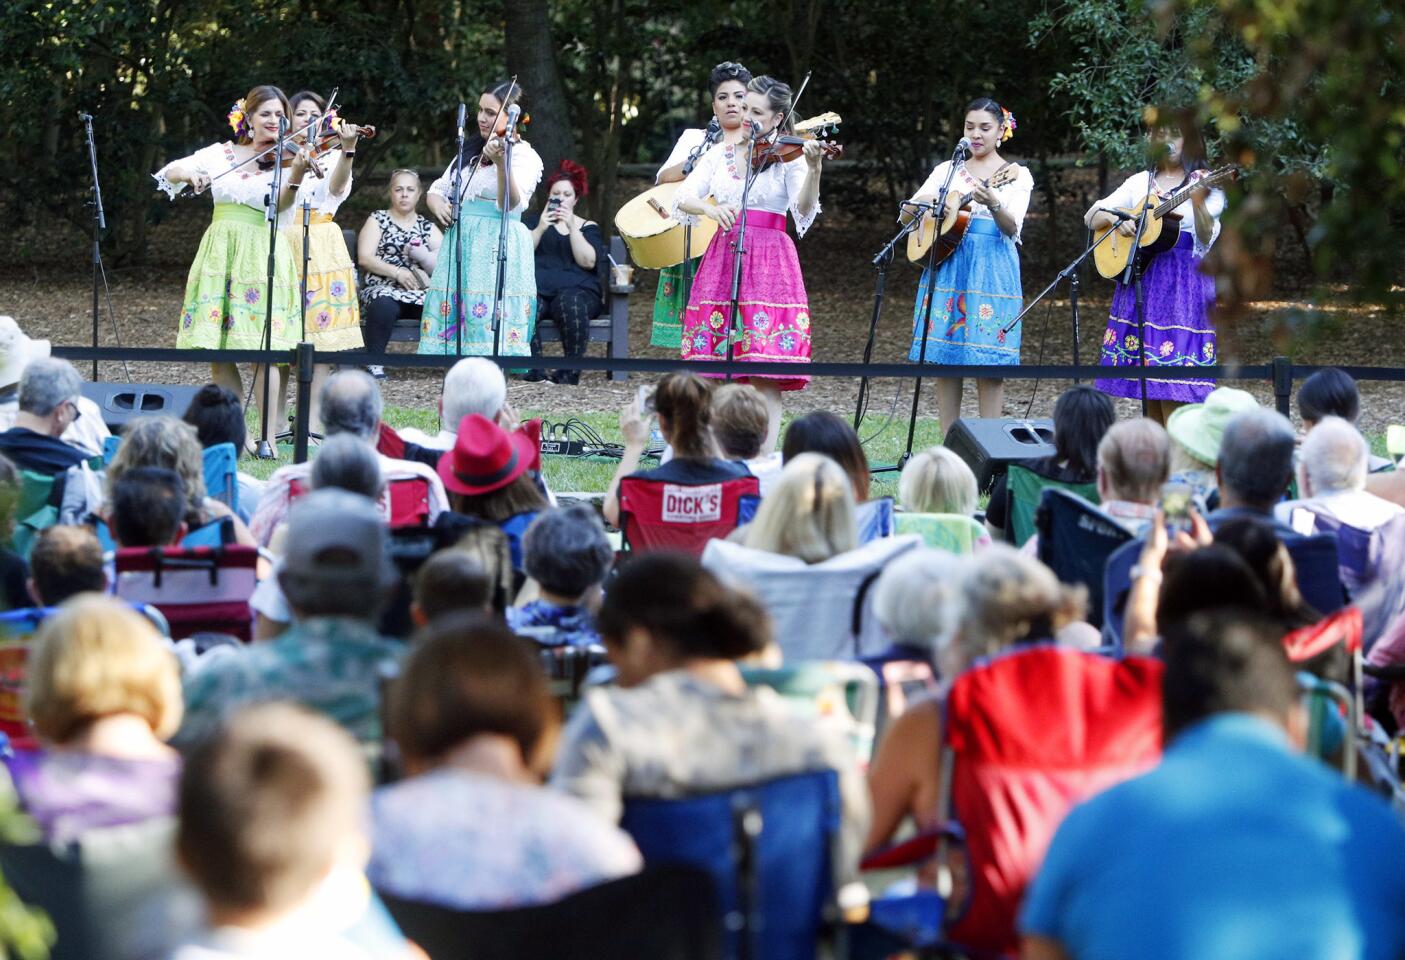 The all-female mariachi band, of Los Angeles, The Hummingbirds, begin their performance for a crowd on the main lawn at Descanso Gardens for their World Rhythms series on Tuesday, June 26, 2018. This is a six-week series of music and dance performances is one of a few other summer activities intended on drawing people into the gardens during the longer summer days and cooler evening temperatures.